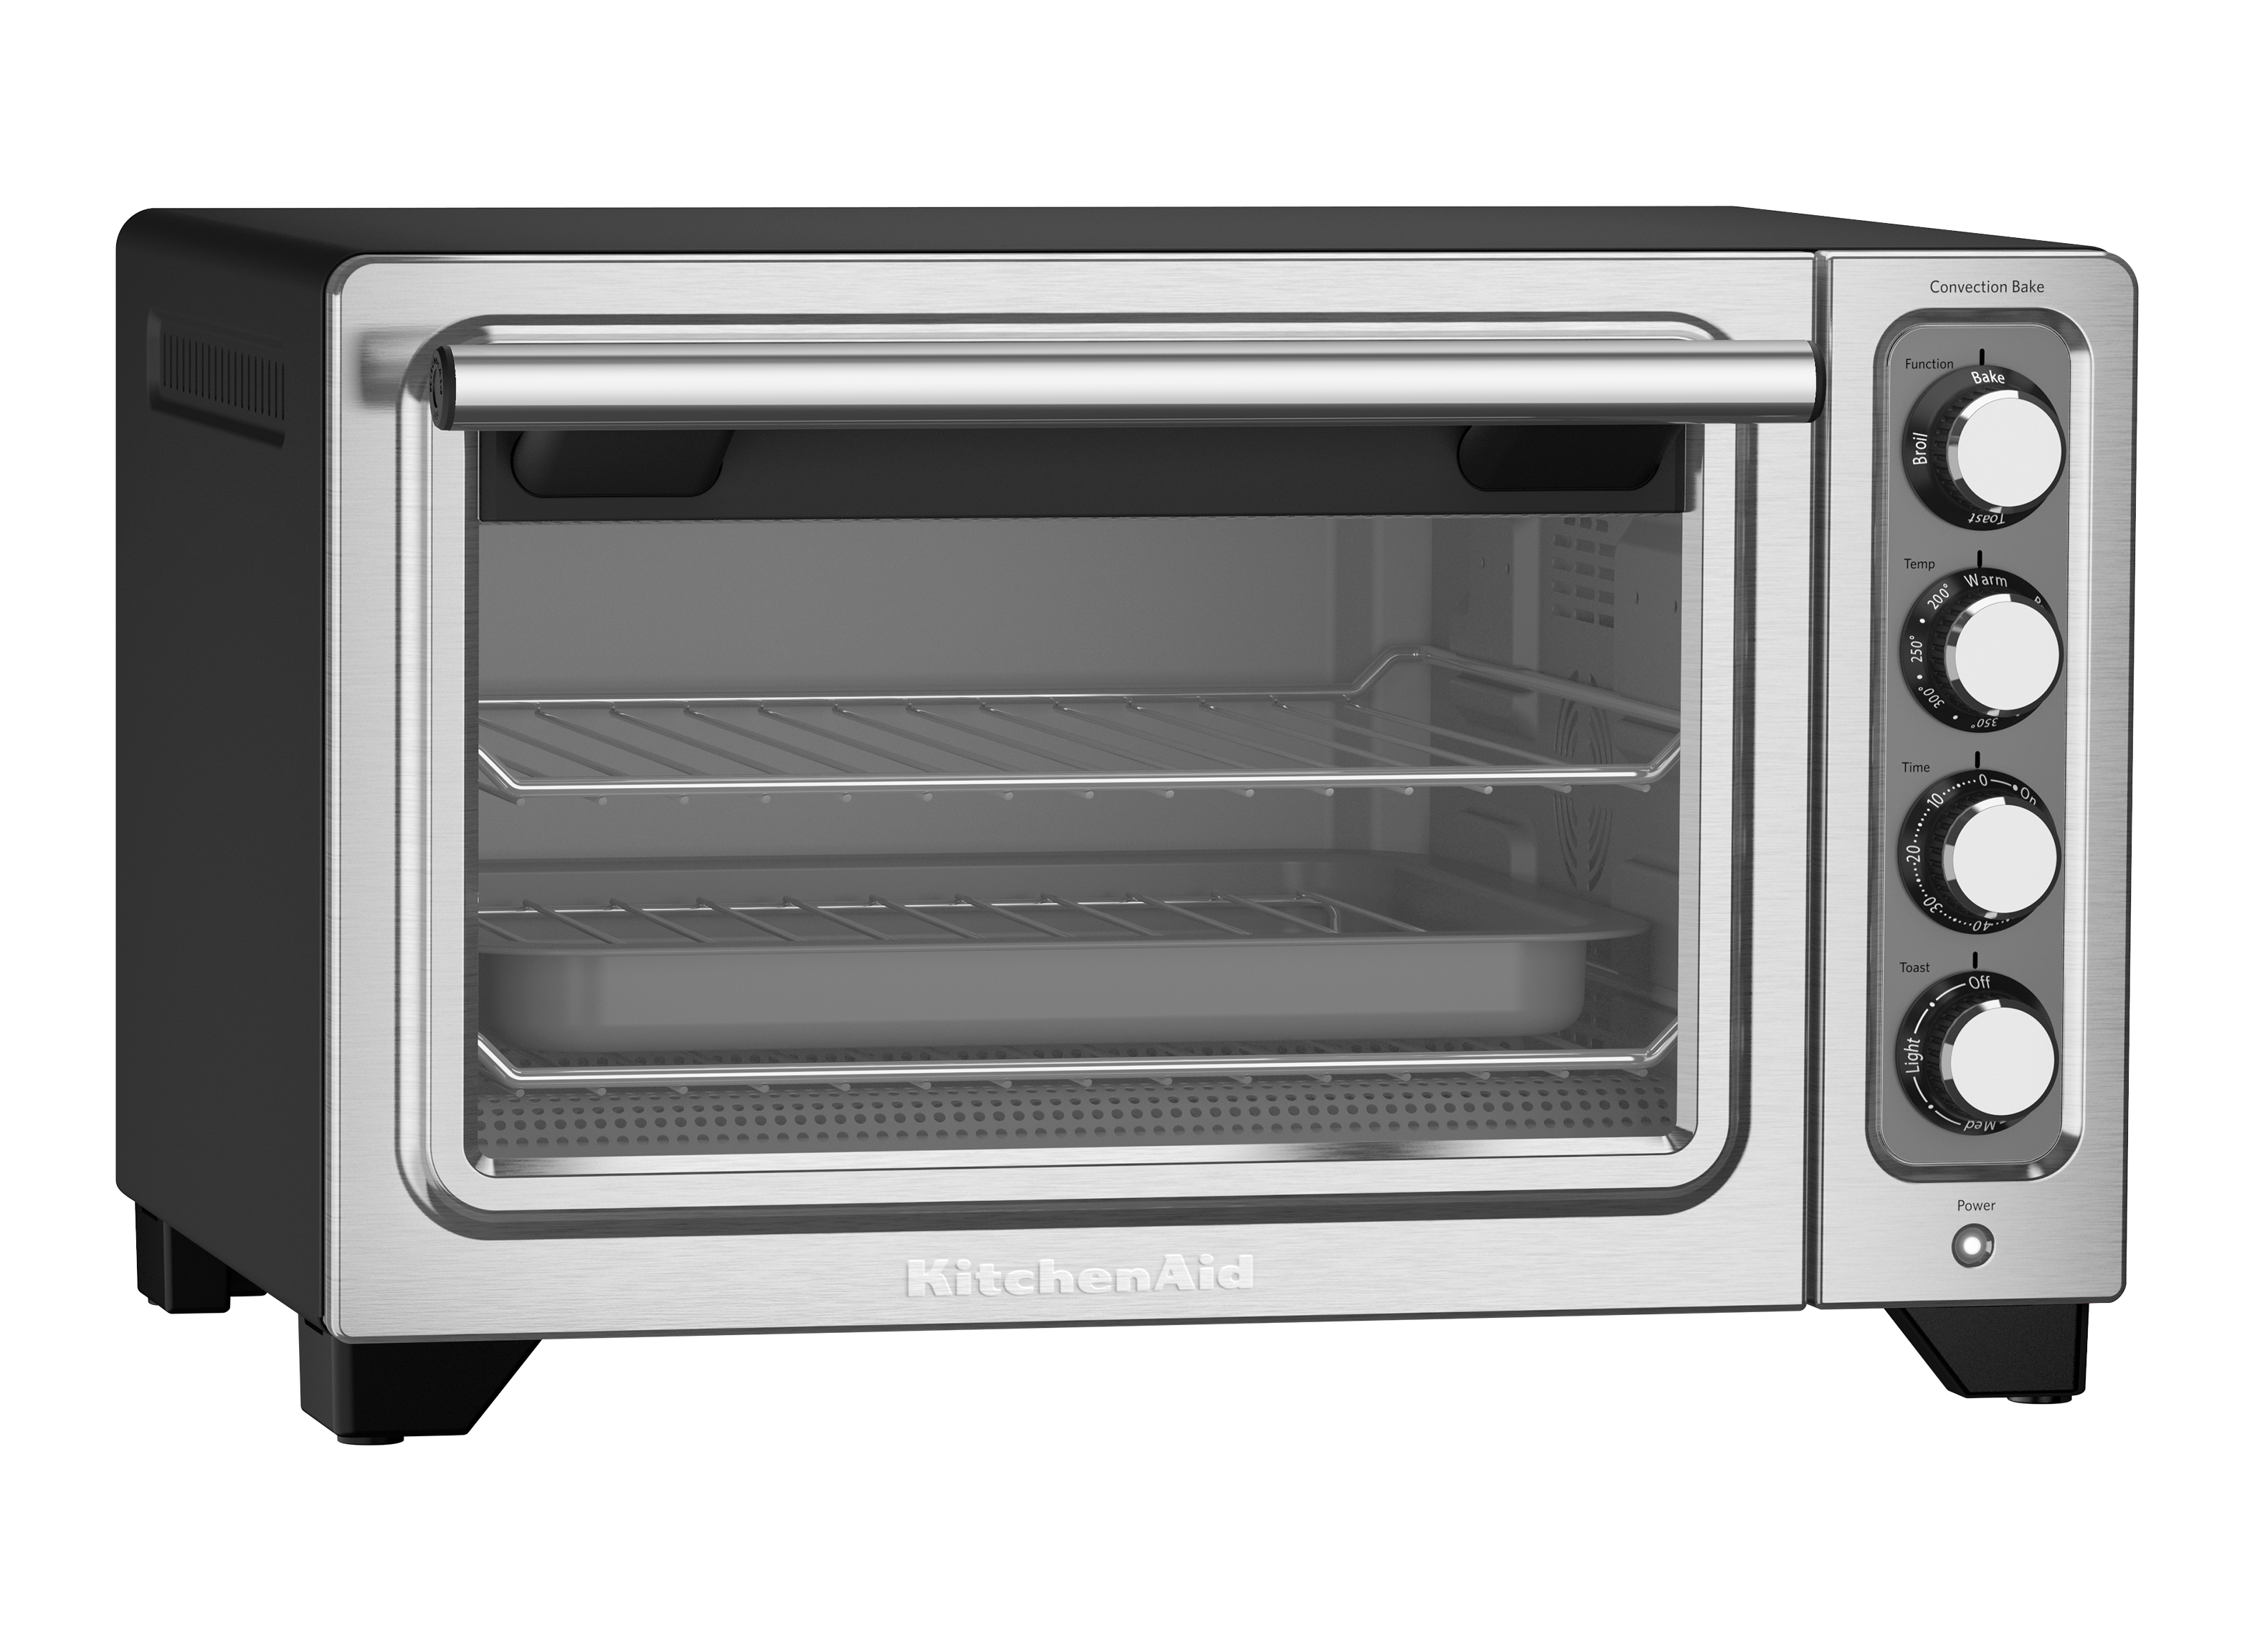 https://crdms.images.consumerreports.org/prod/products/cr/models/400896-toaster-ovens-kitchenaid-kco255bm-dual-convection-10012296.png